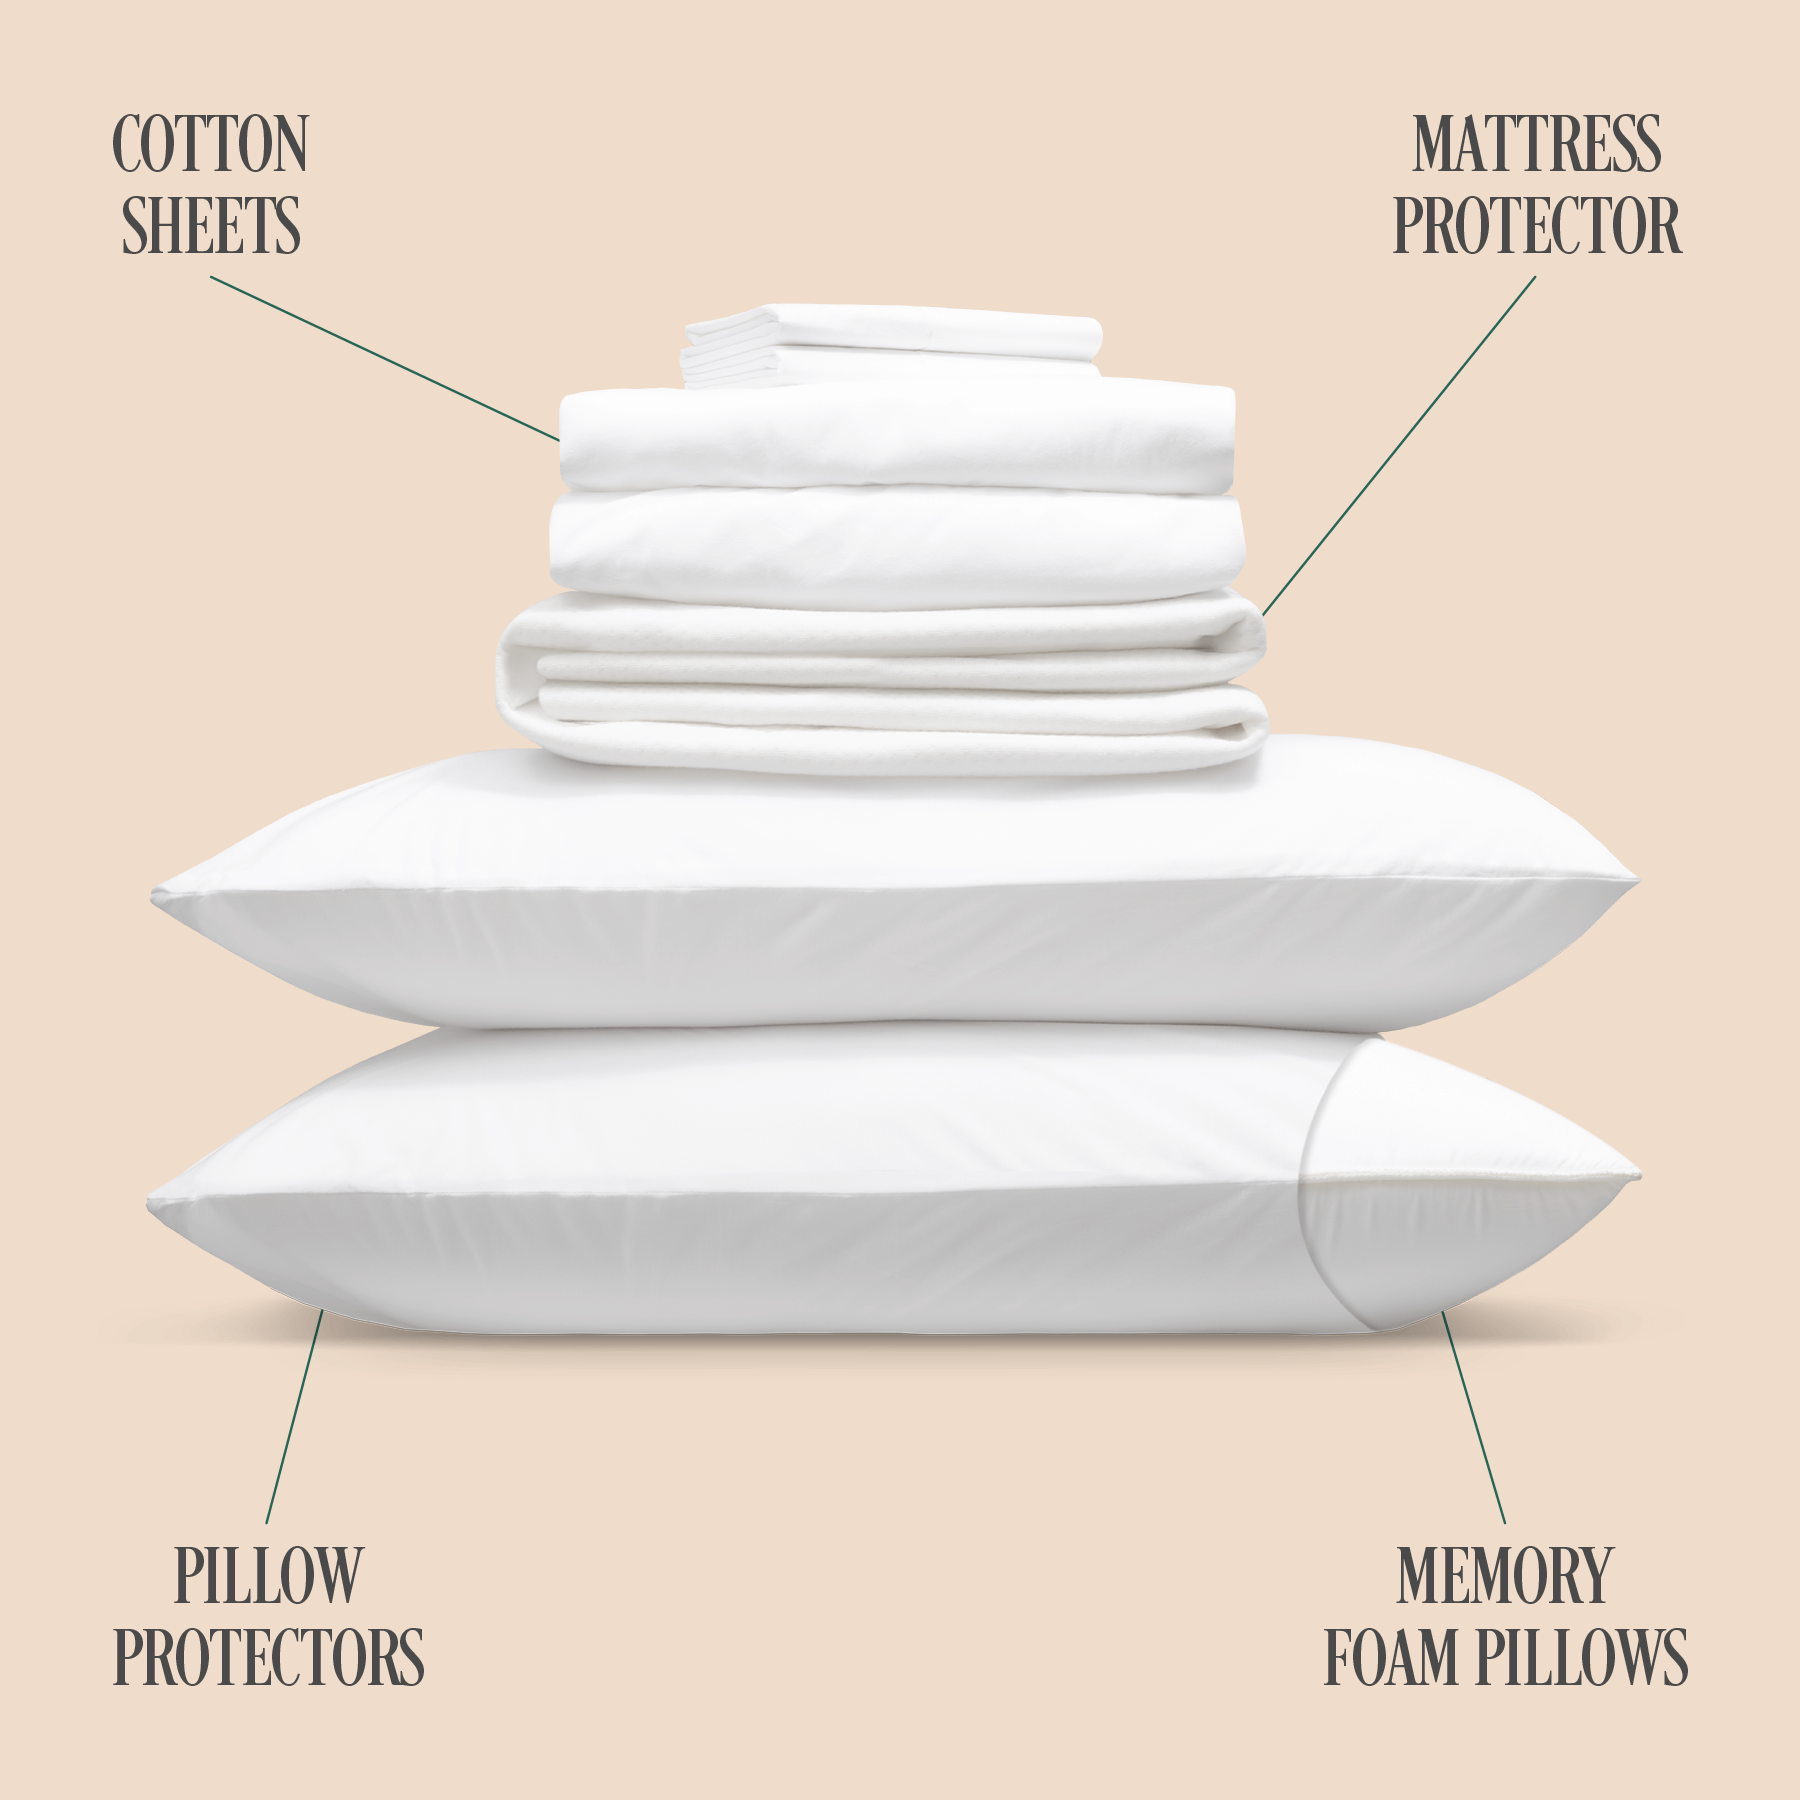 Free Comfort bundle includes sheets, pillows, mattress protector and pillow protectors